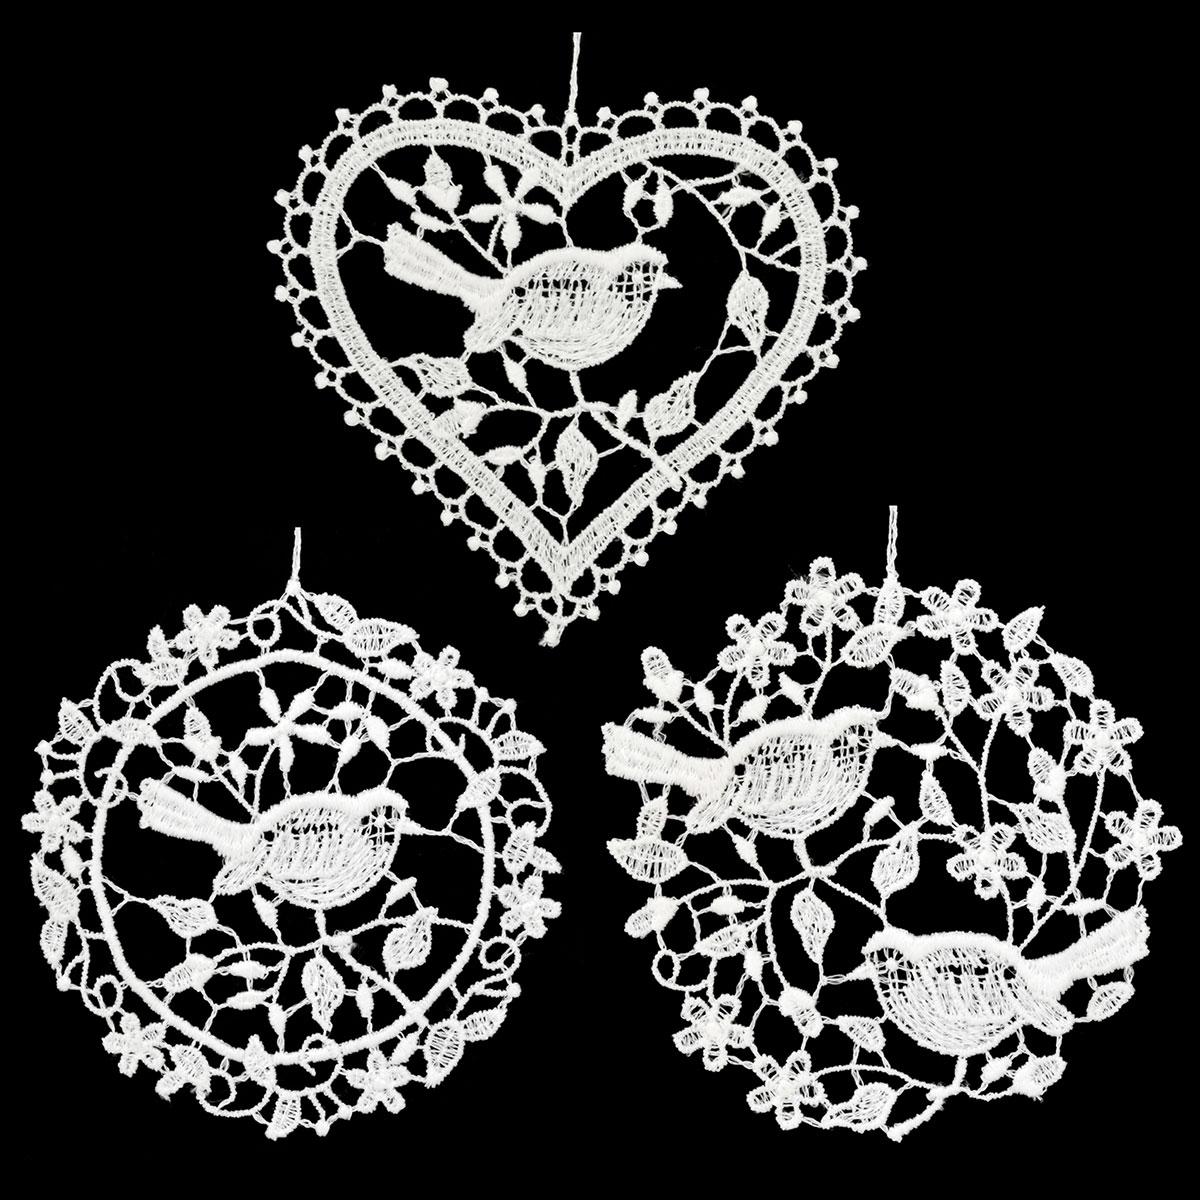 Bird Designs Lace Stitched Ornament Set Of 3